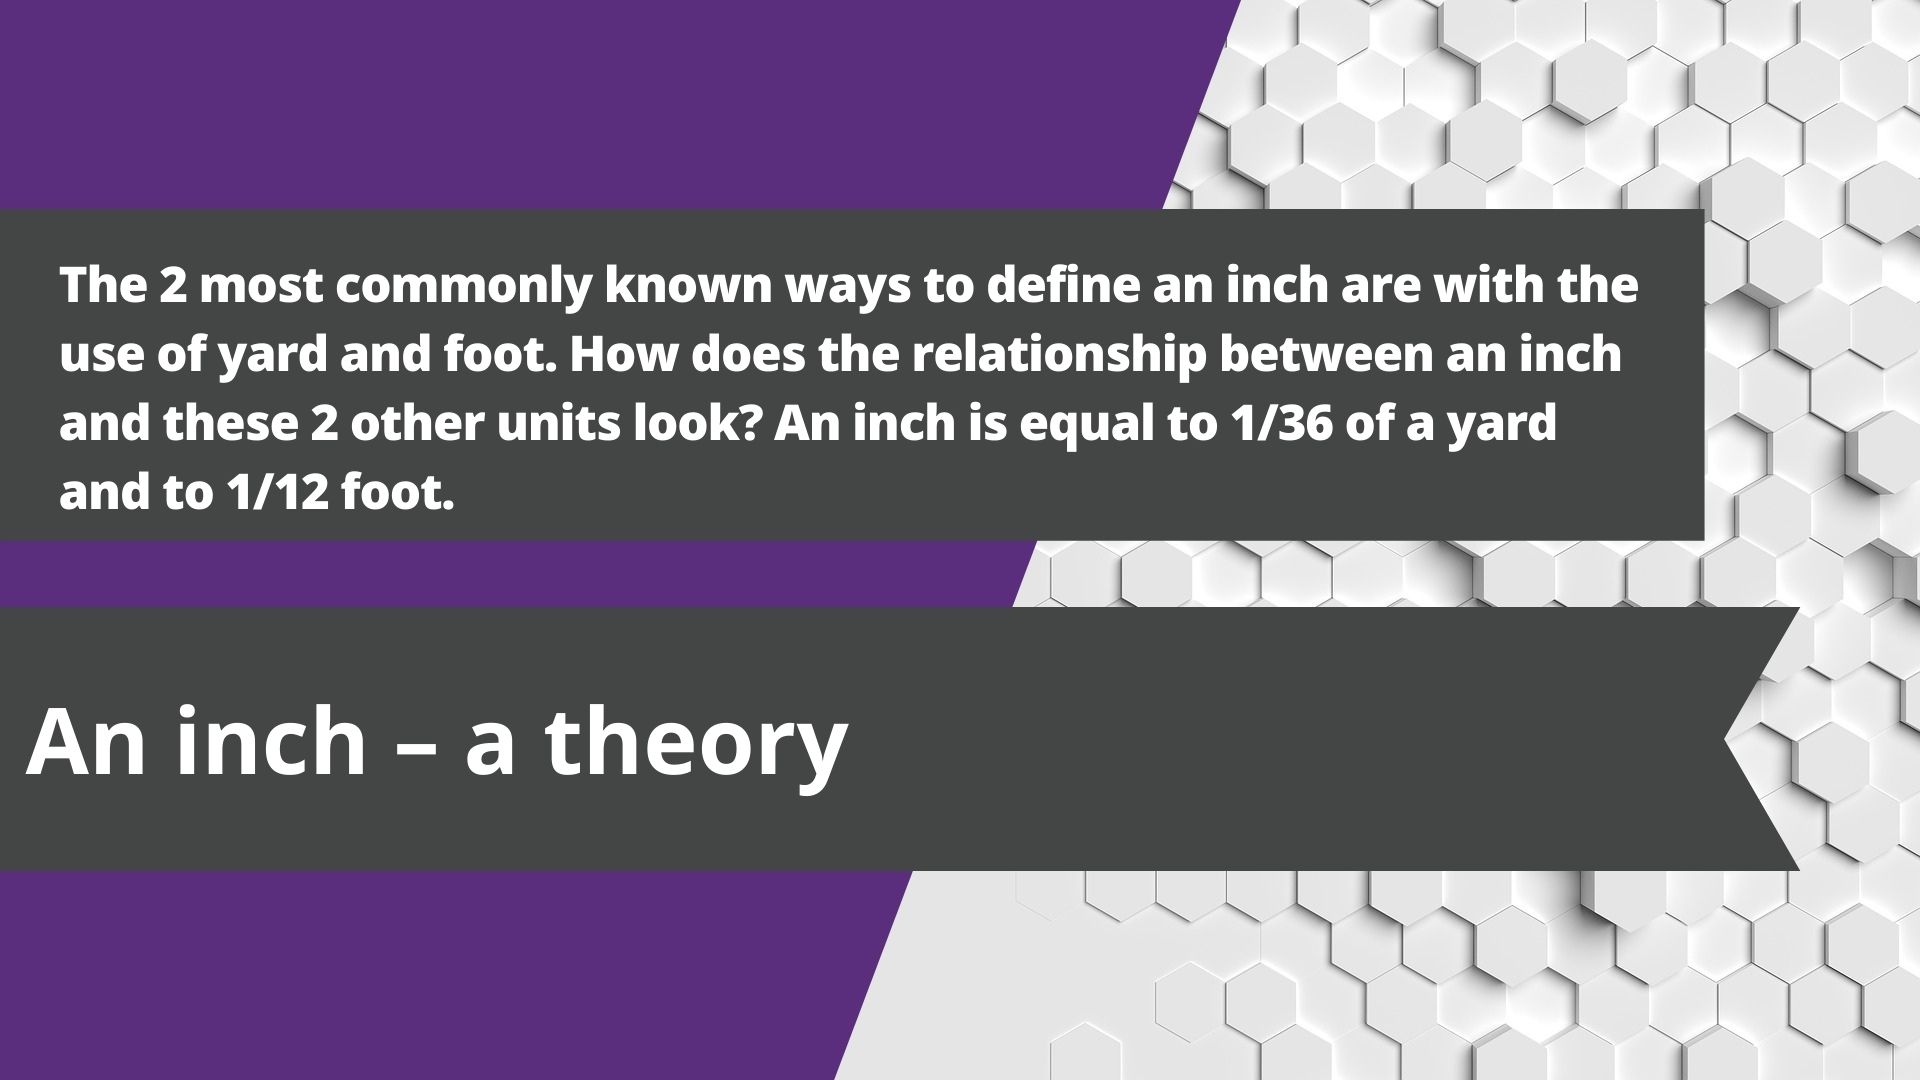 An inch – a theory